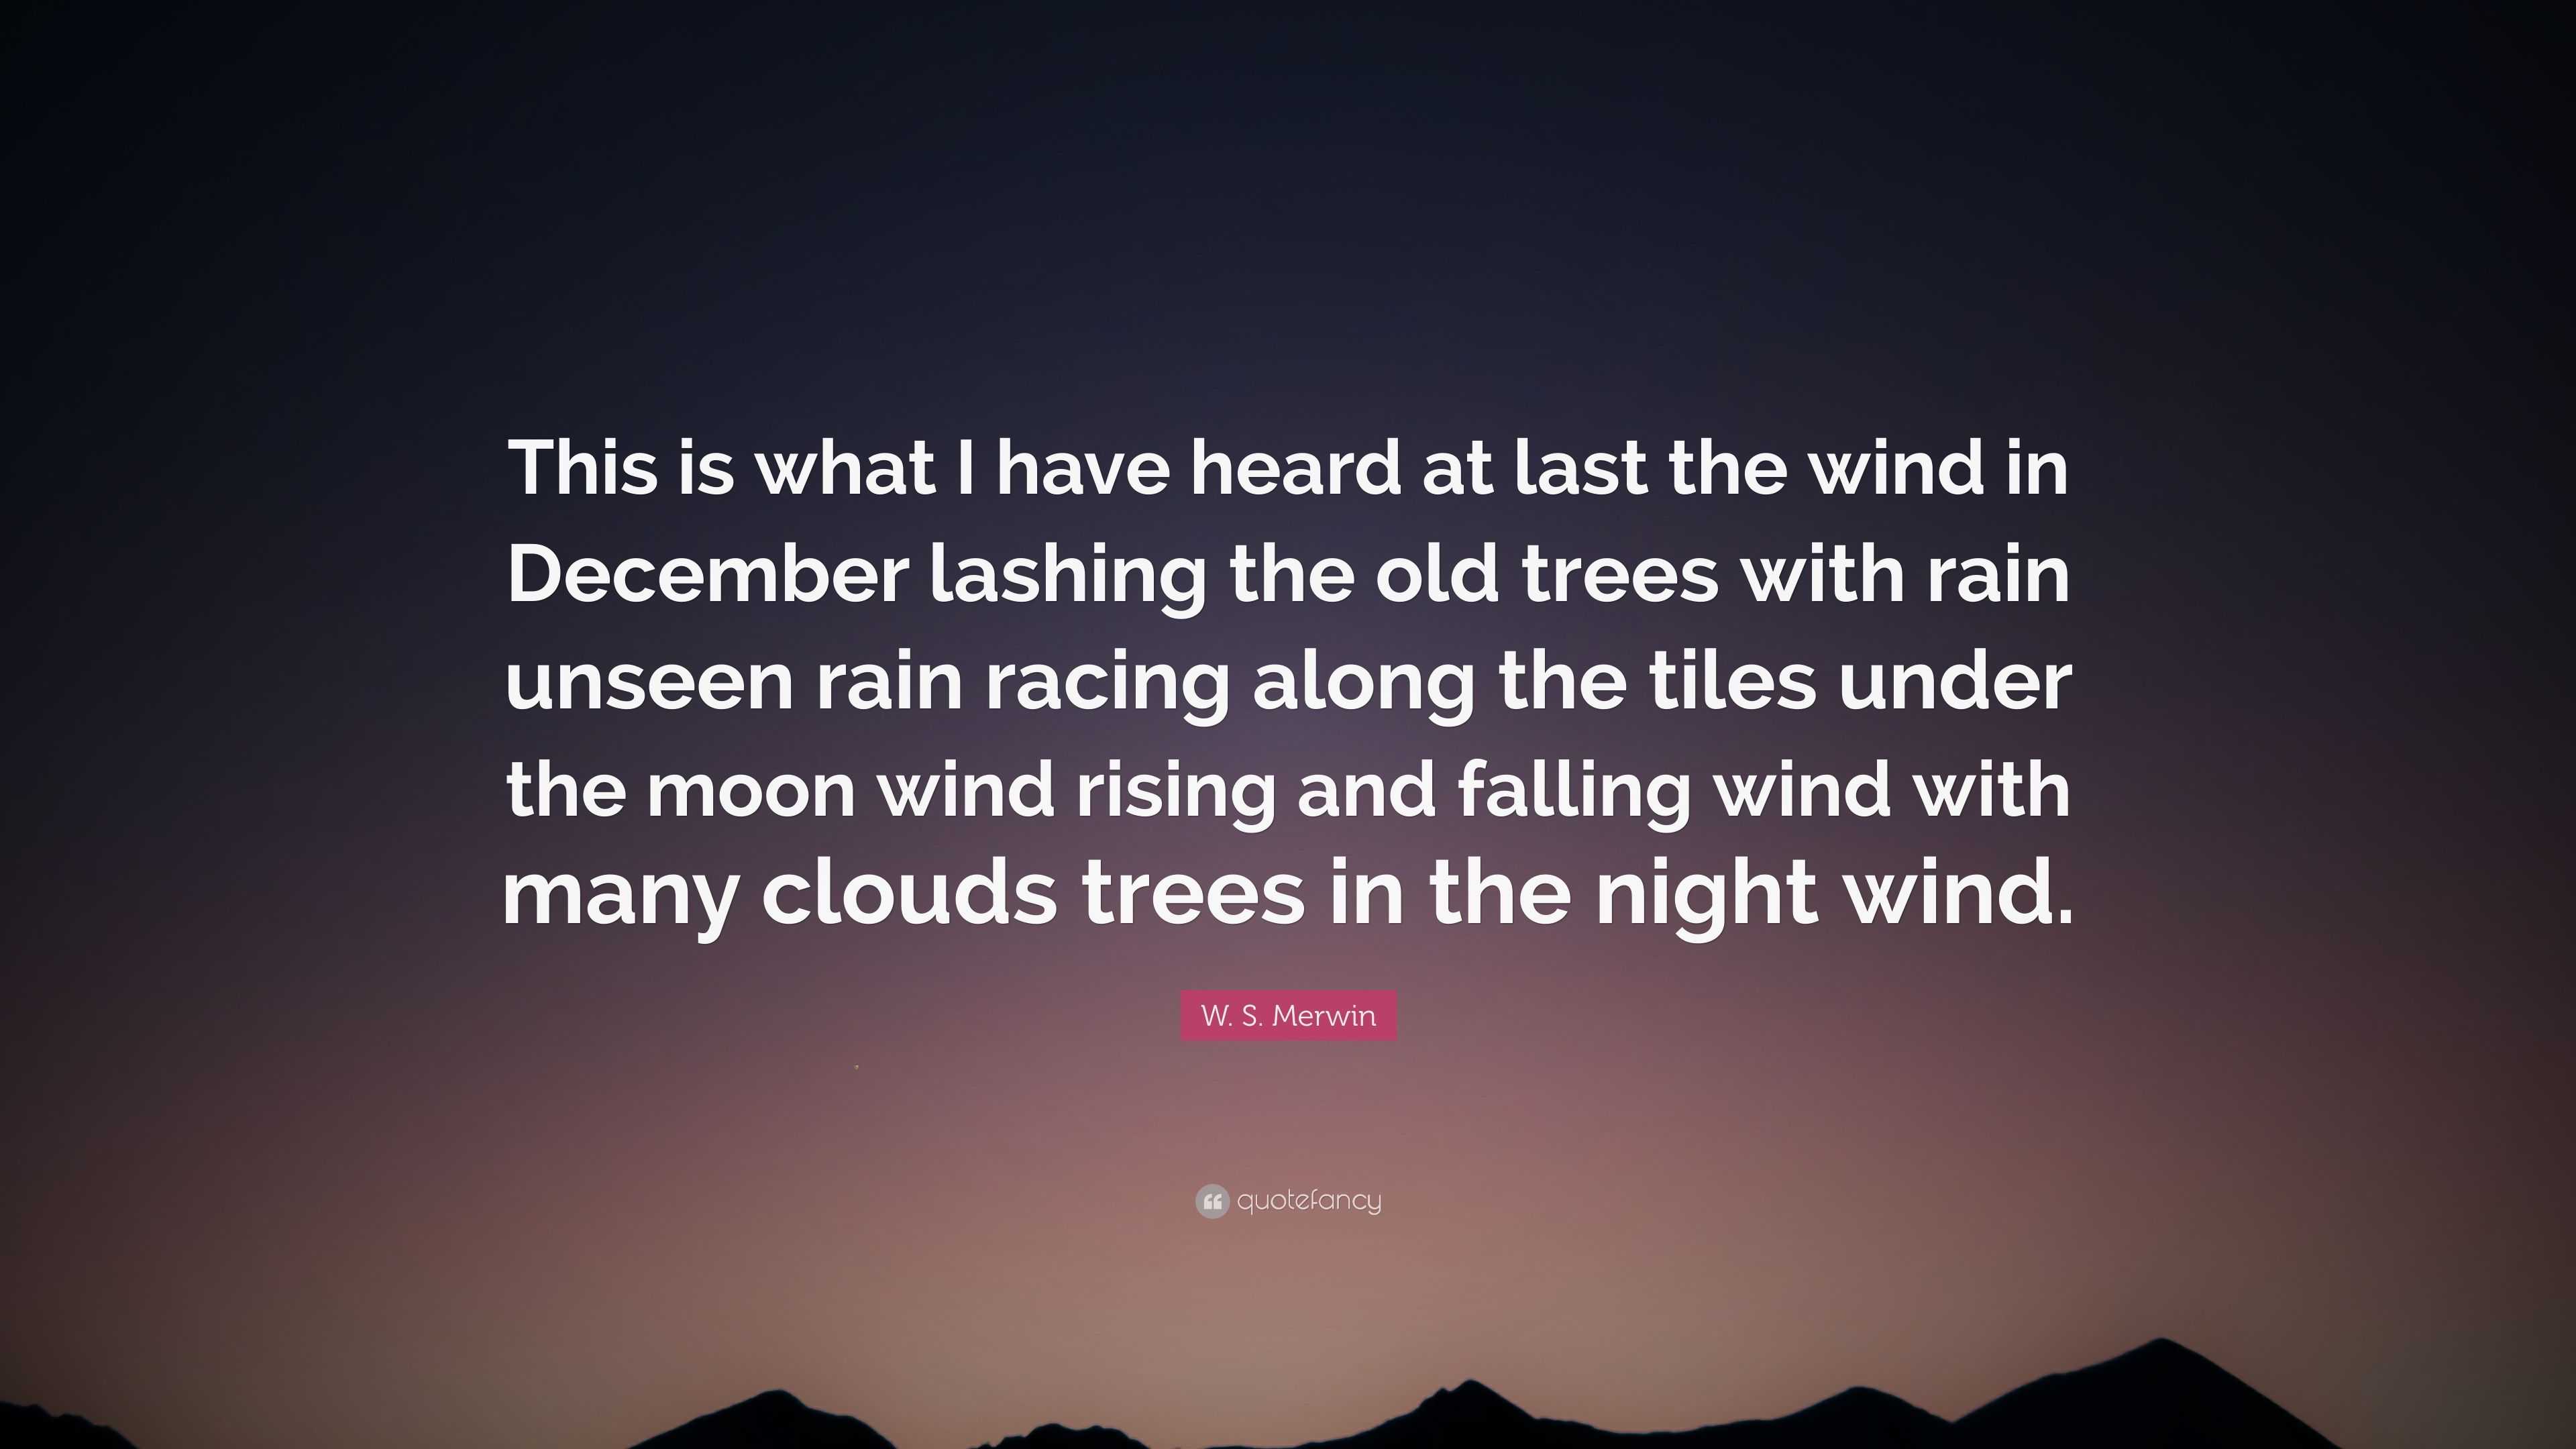 W. S. Merwin Quote: “This is what I have heard at last the wind in December  lashing the old trees with rain unseen rain racing along the tile”